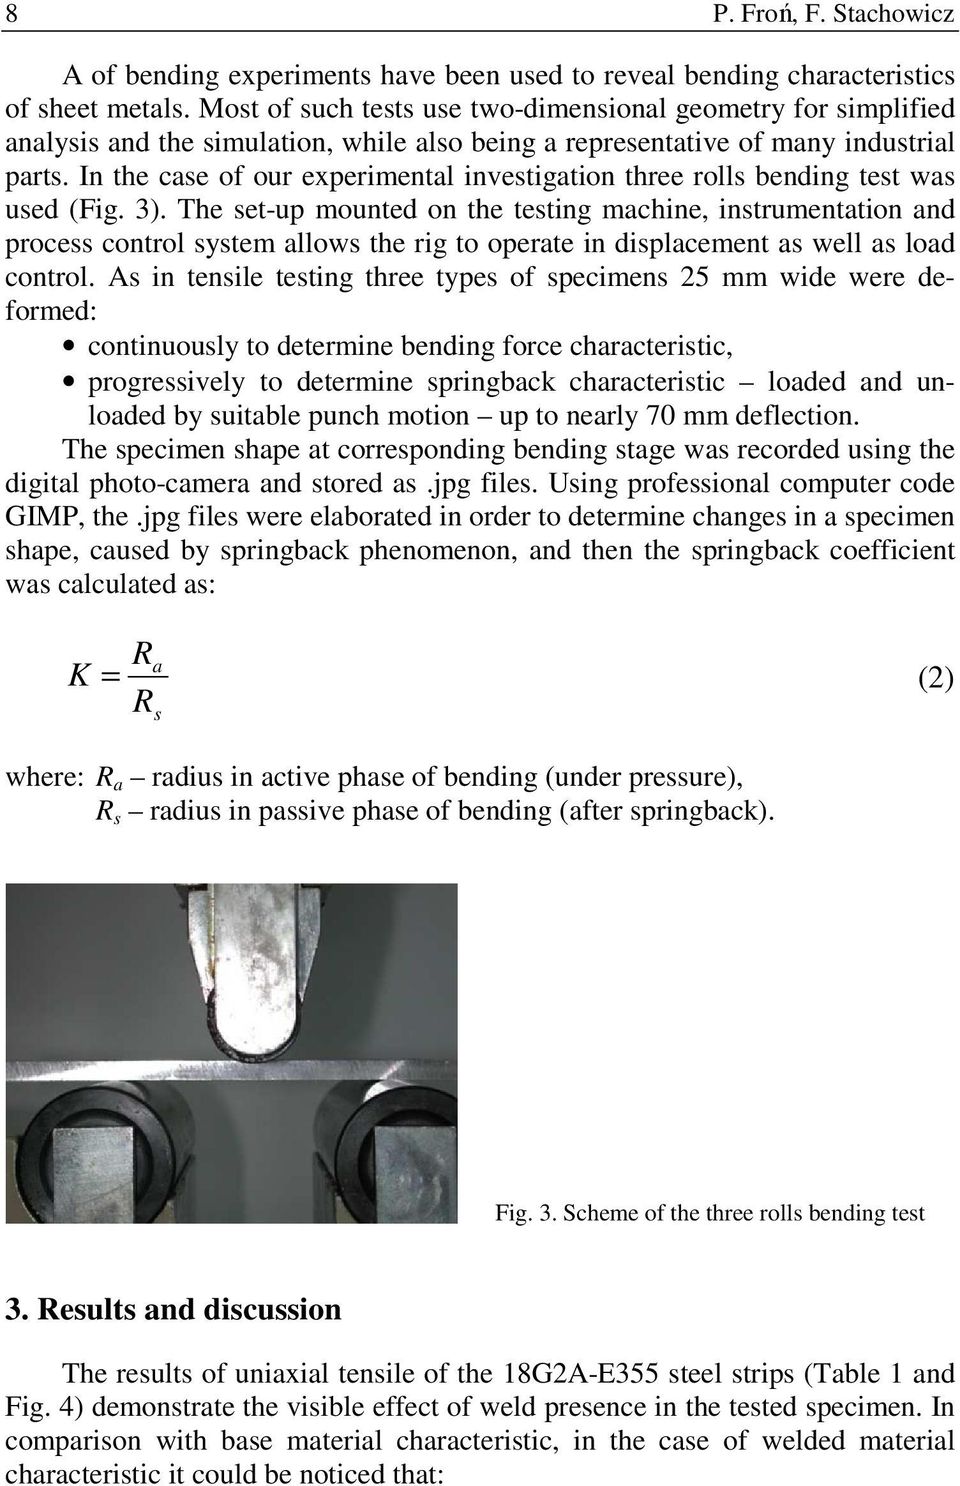 In the case of our experimental investigation three rolls bending test was used (Fig. 3).